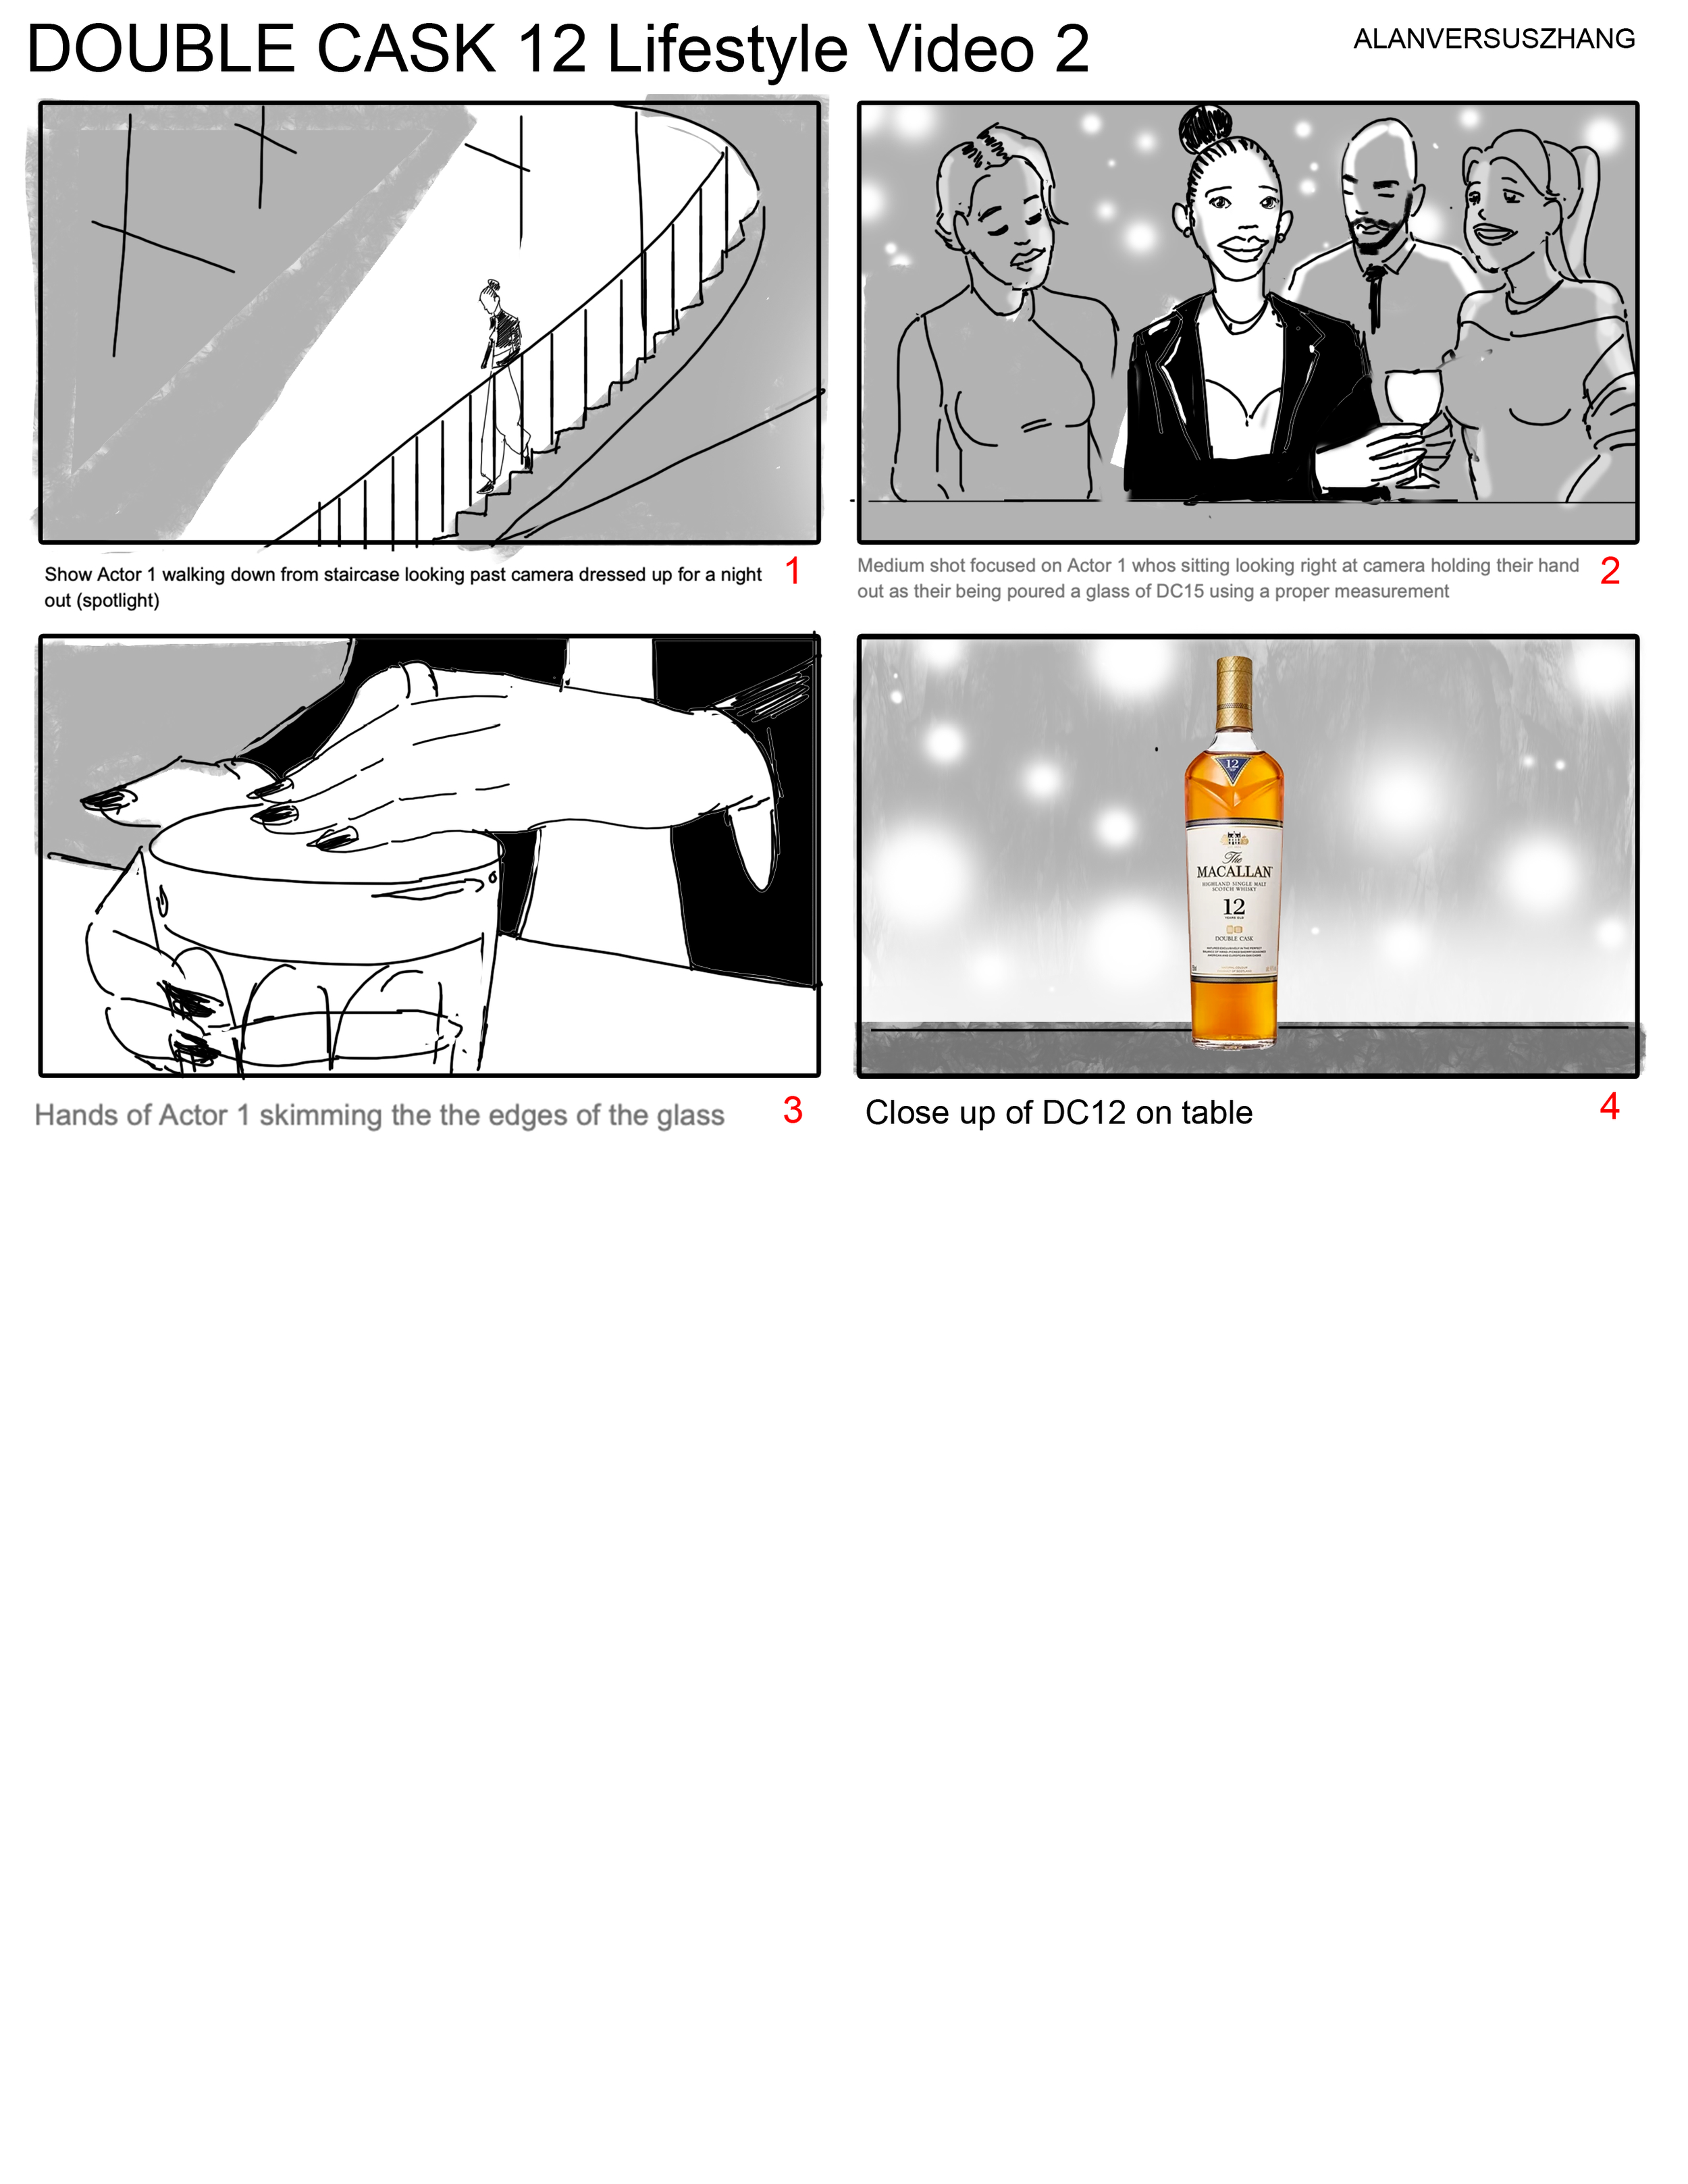 11.10.23_Macallan_Storyboards_Page_04_Image_0001.png